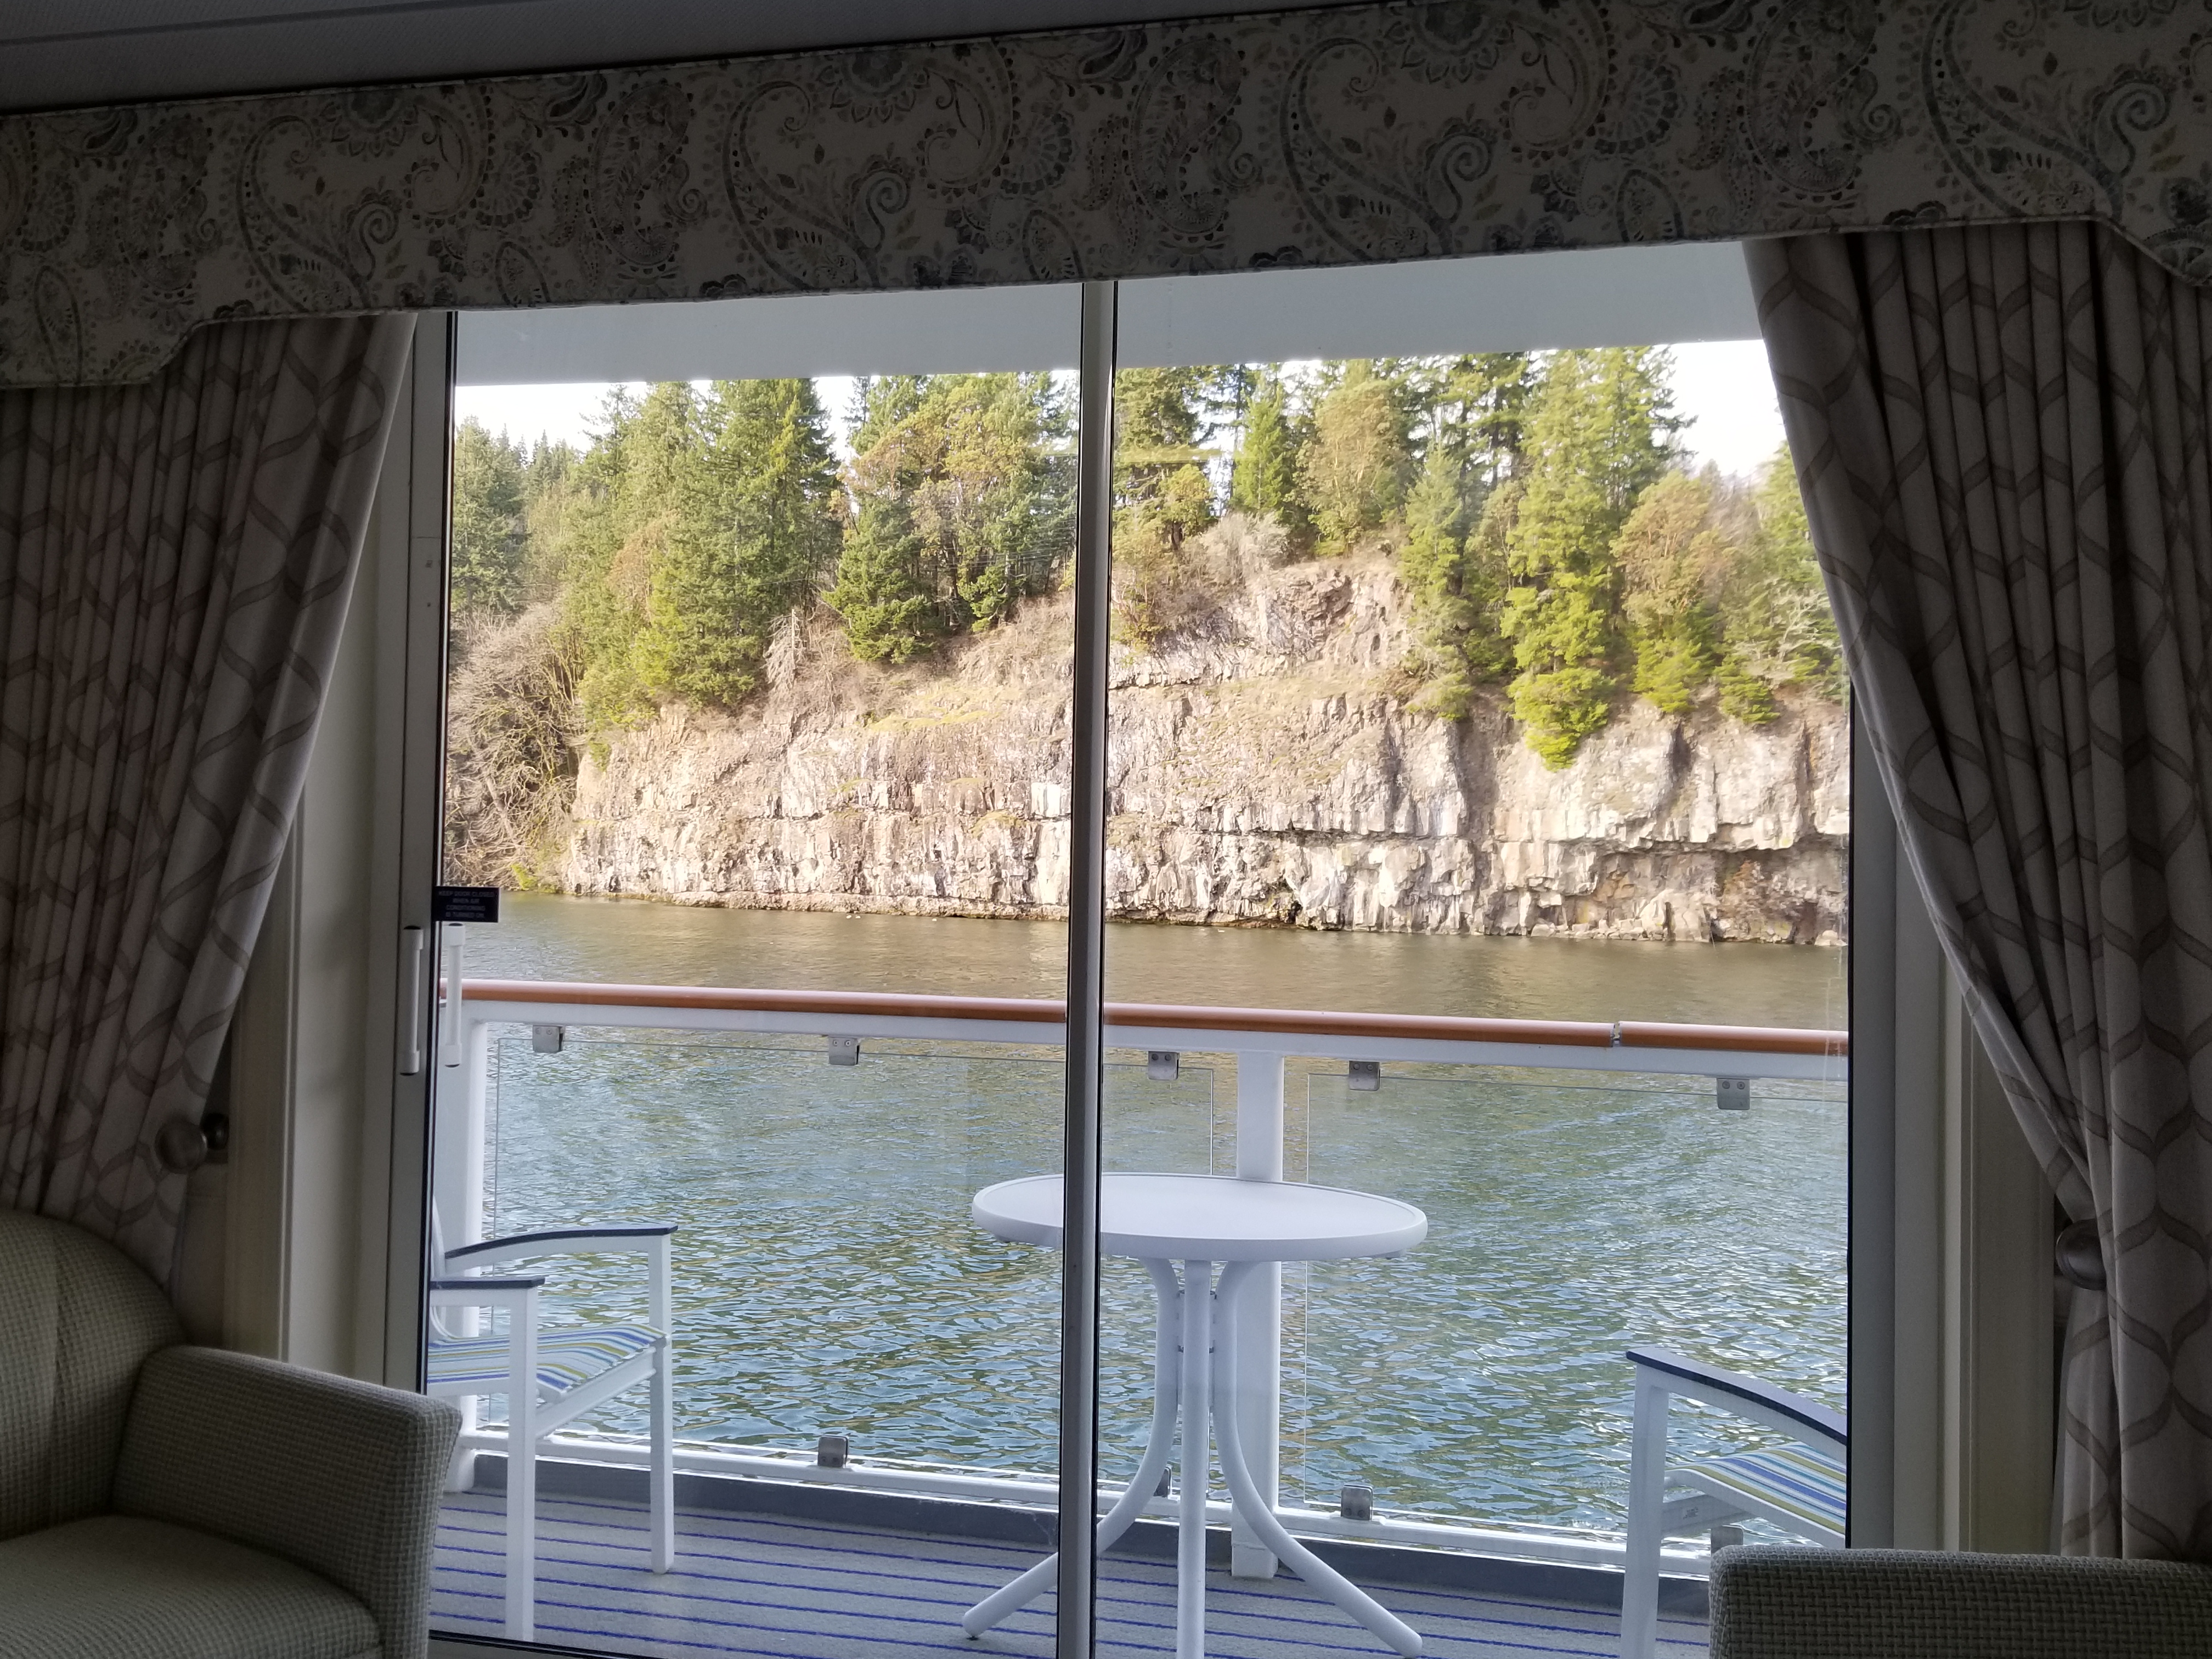 A room with a view from the stateroom with its own private balcony. You can choose how much you want to socialize. Enjoy breakfast on your balcony if you desire! Aboard the American Song small cruise ship on the Columbia River.